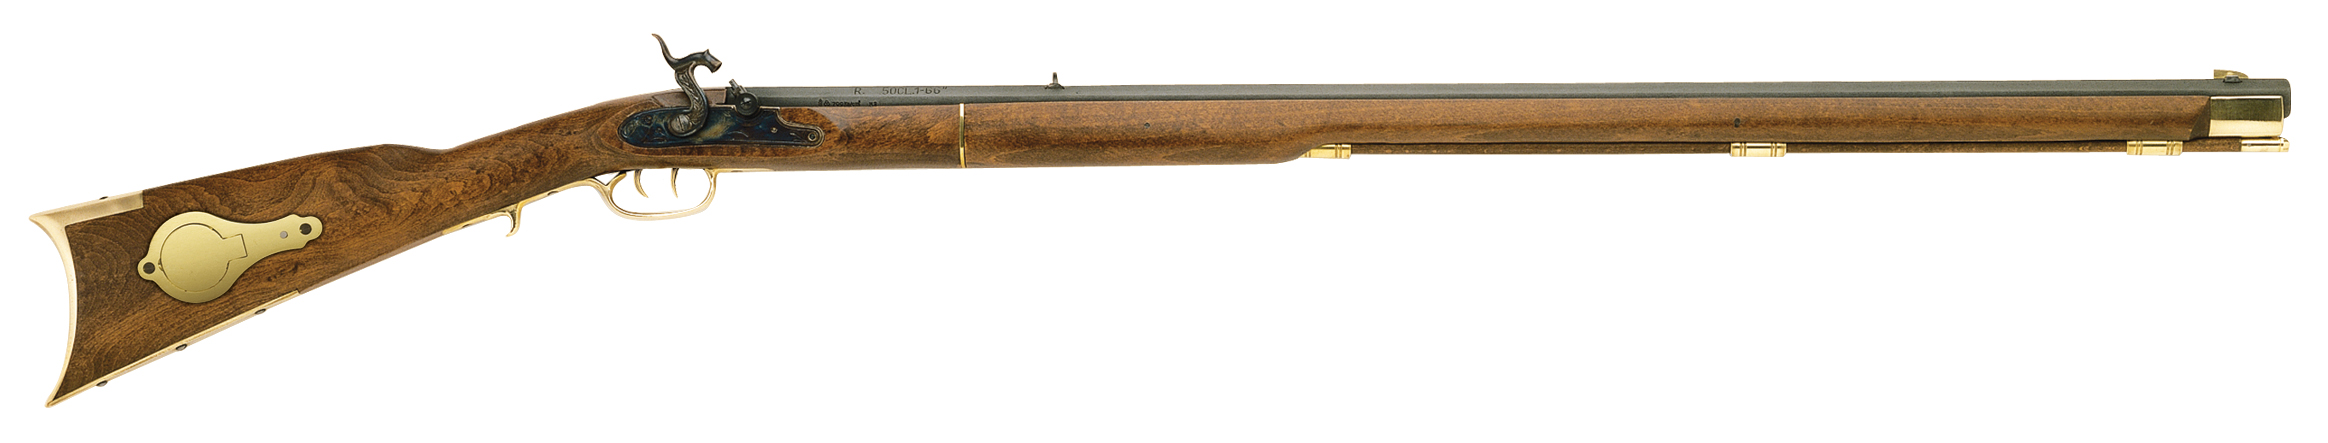 Traditions Deluxe Kentucky Rifle